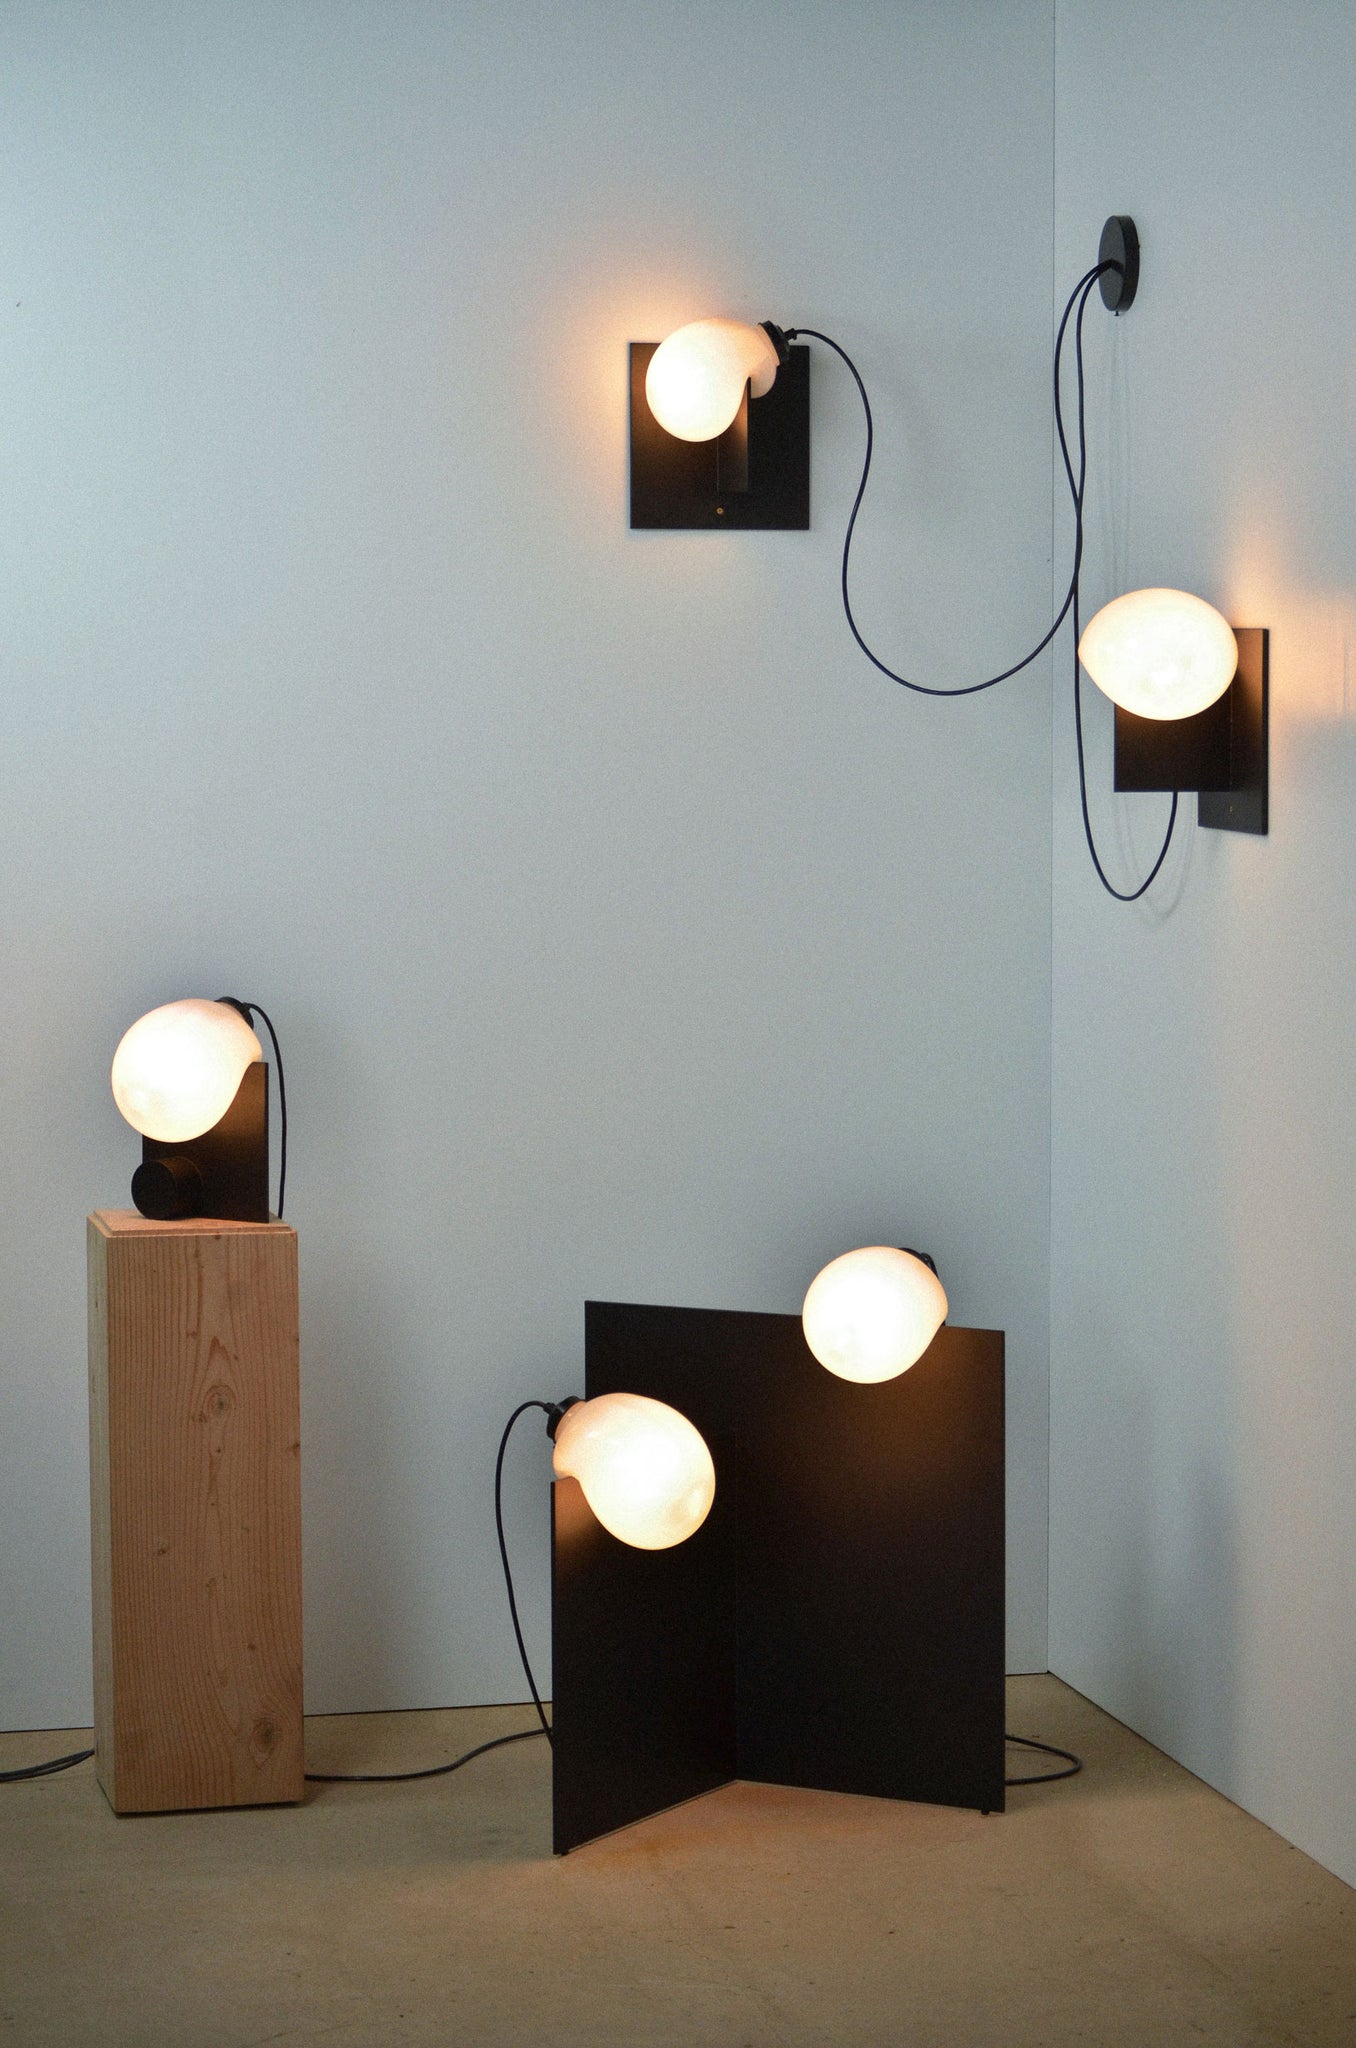 The Bloop Floor Lamp, Bloop Table Lamp on a wood pedestal, and two Bloop Sconces mounted on the wall in the corner